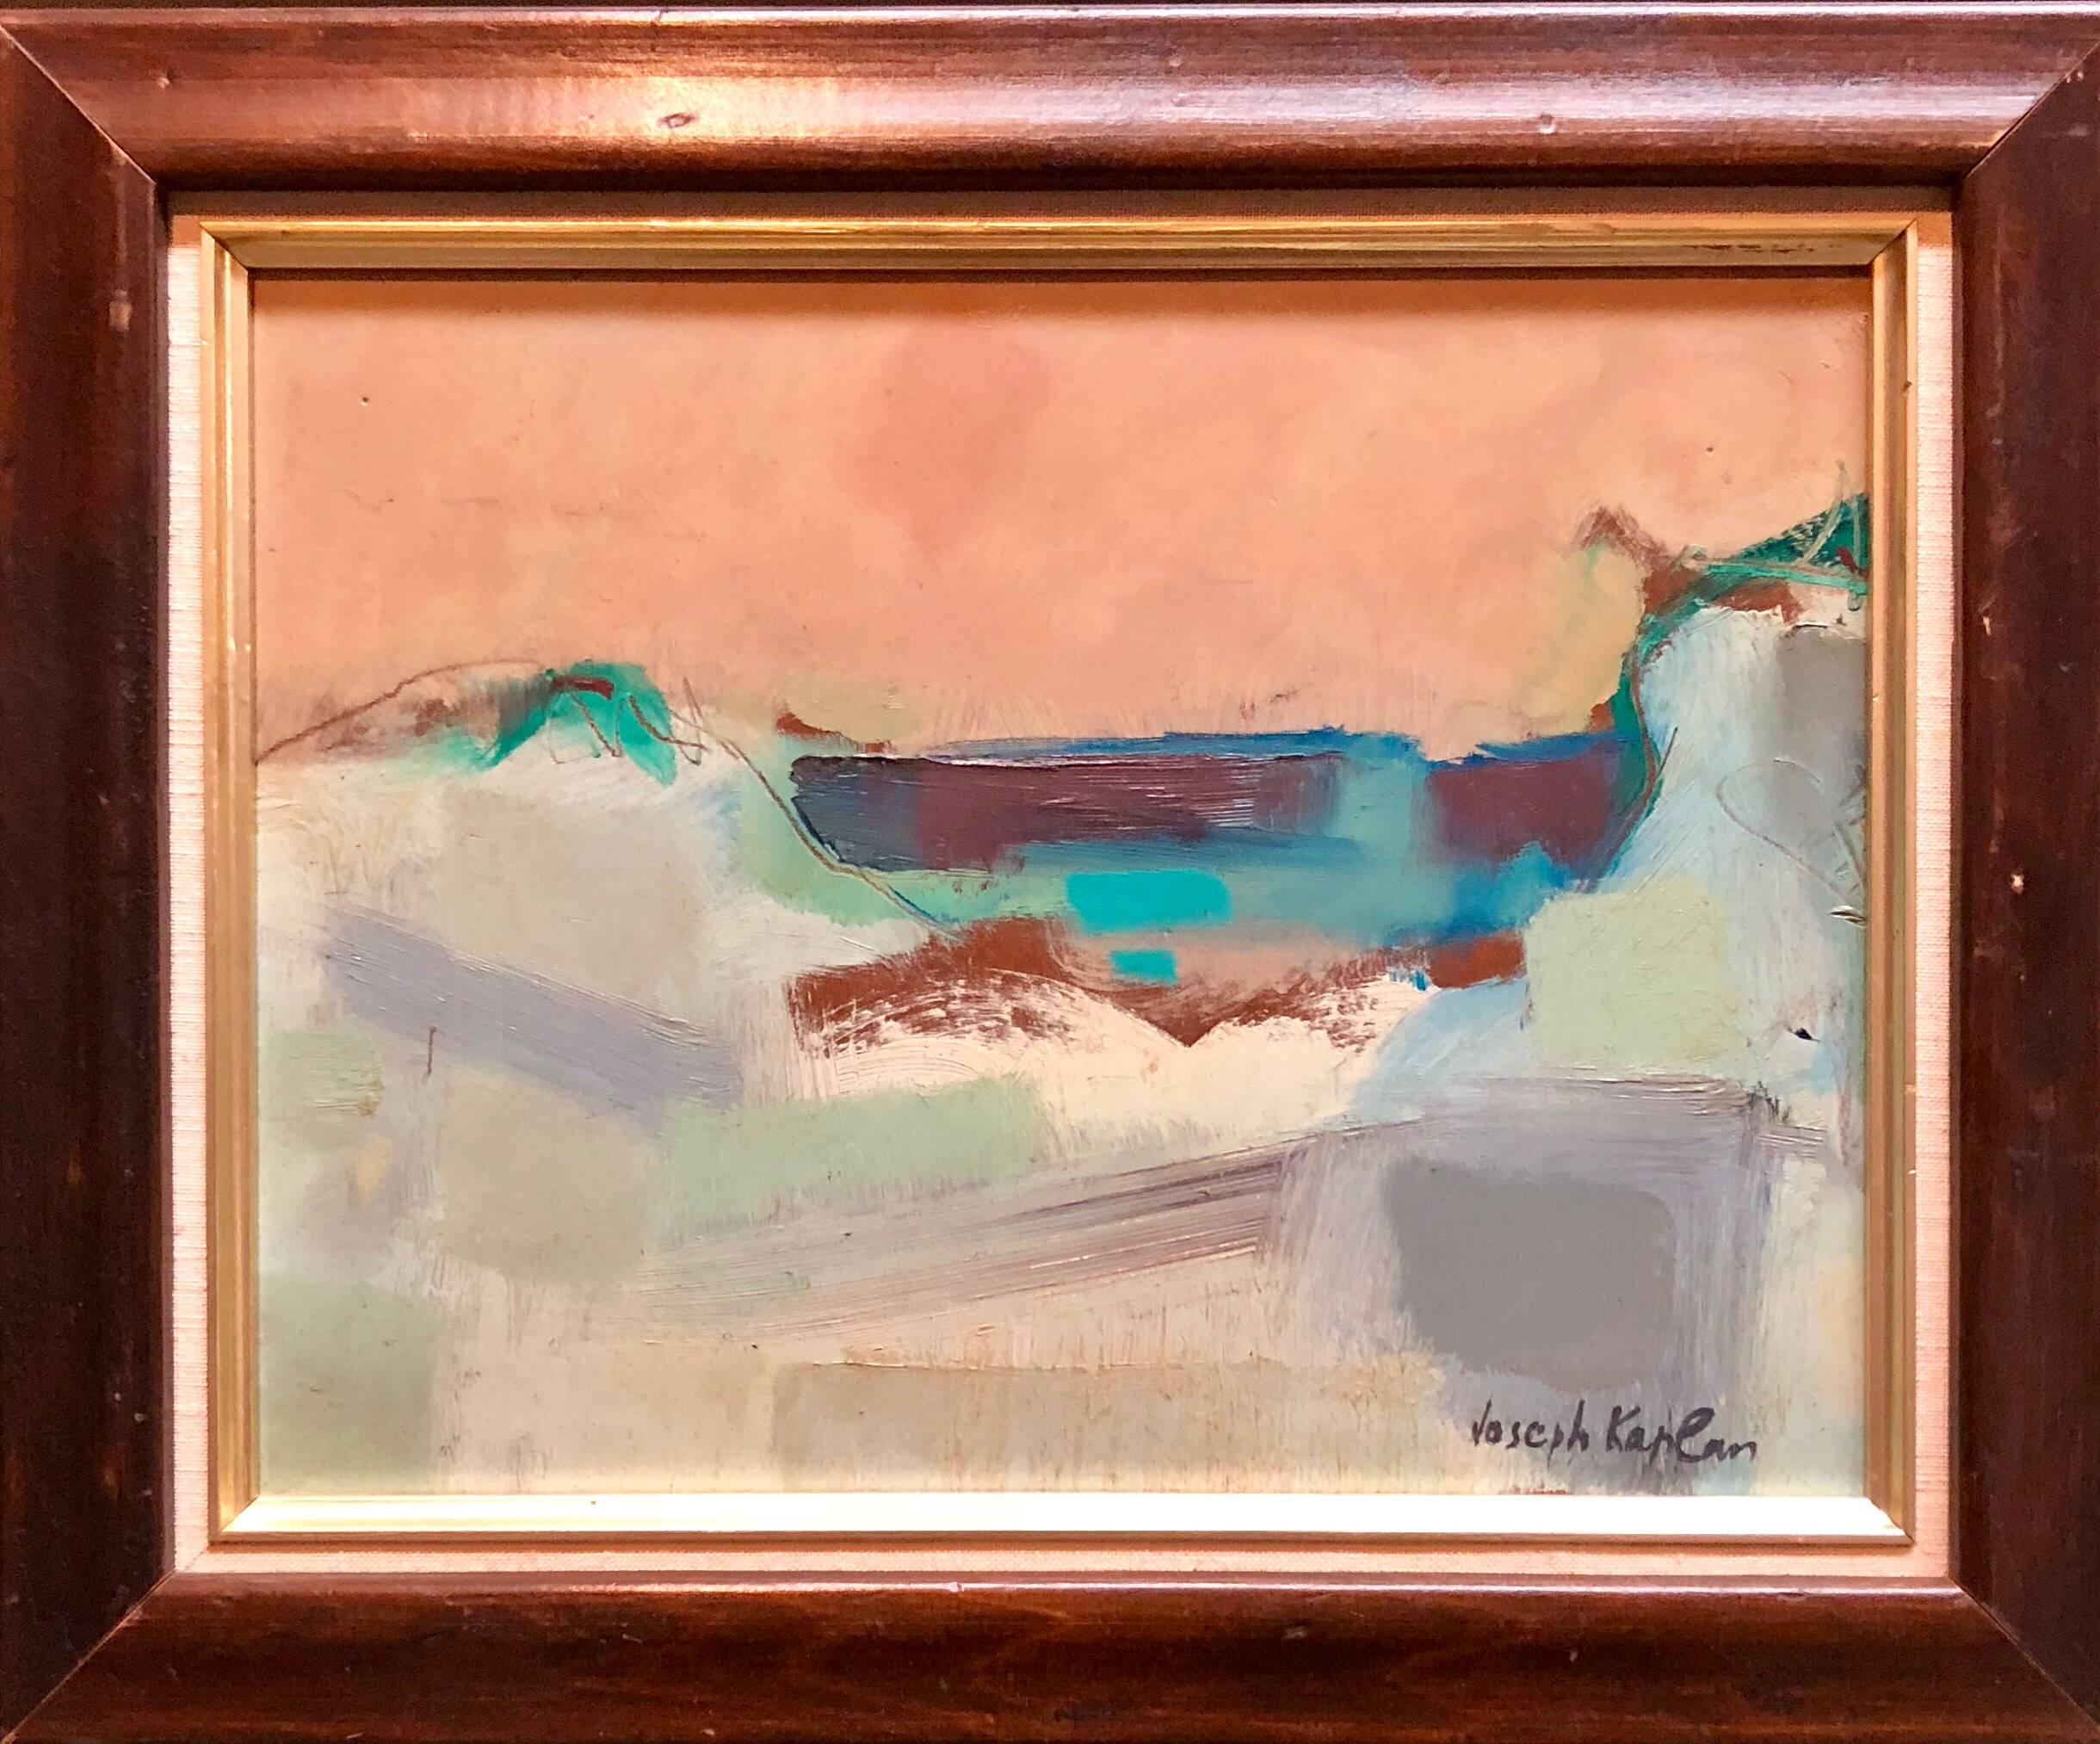 Joseph Kaplan Landscape Painting - Abstract Expressionist Provincetown Seascape Oil Painting